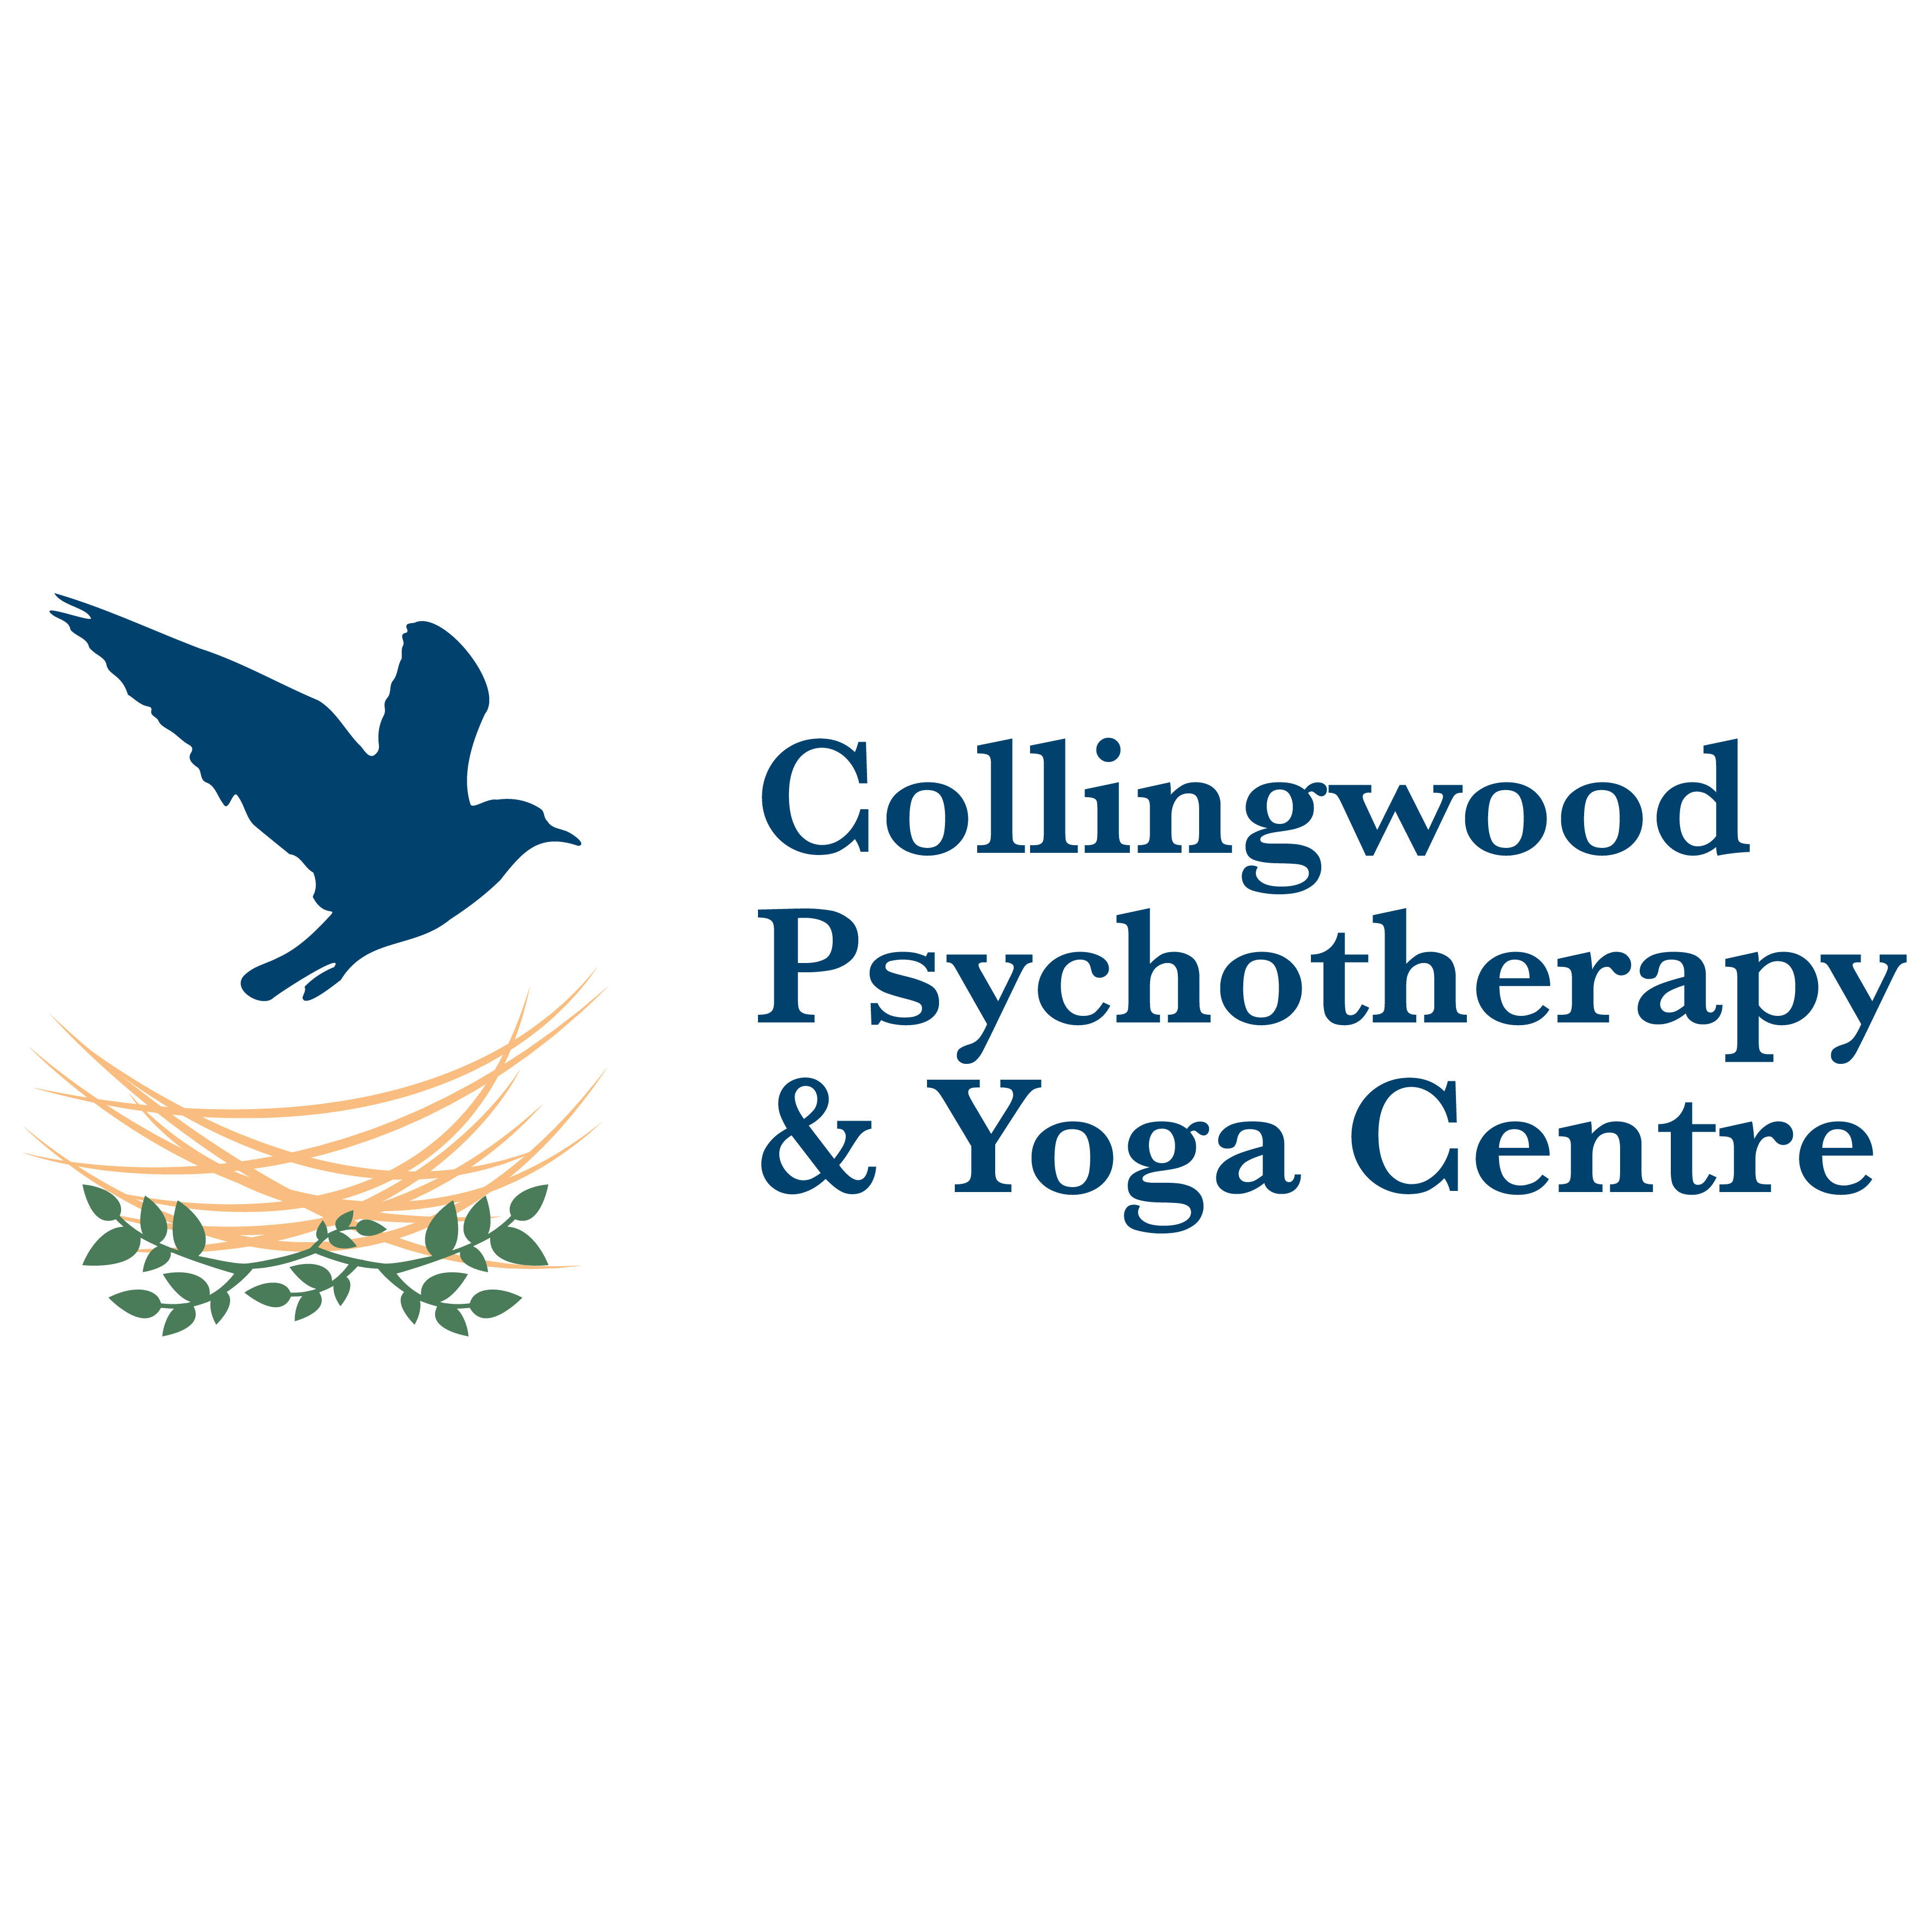 Collingwood Psychotherapy & Yoga Centre Logo